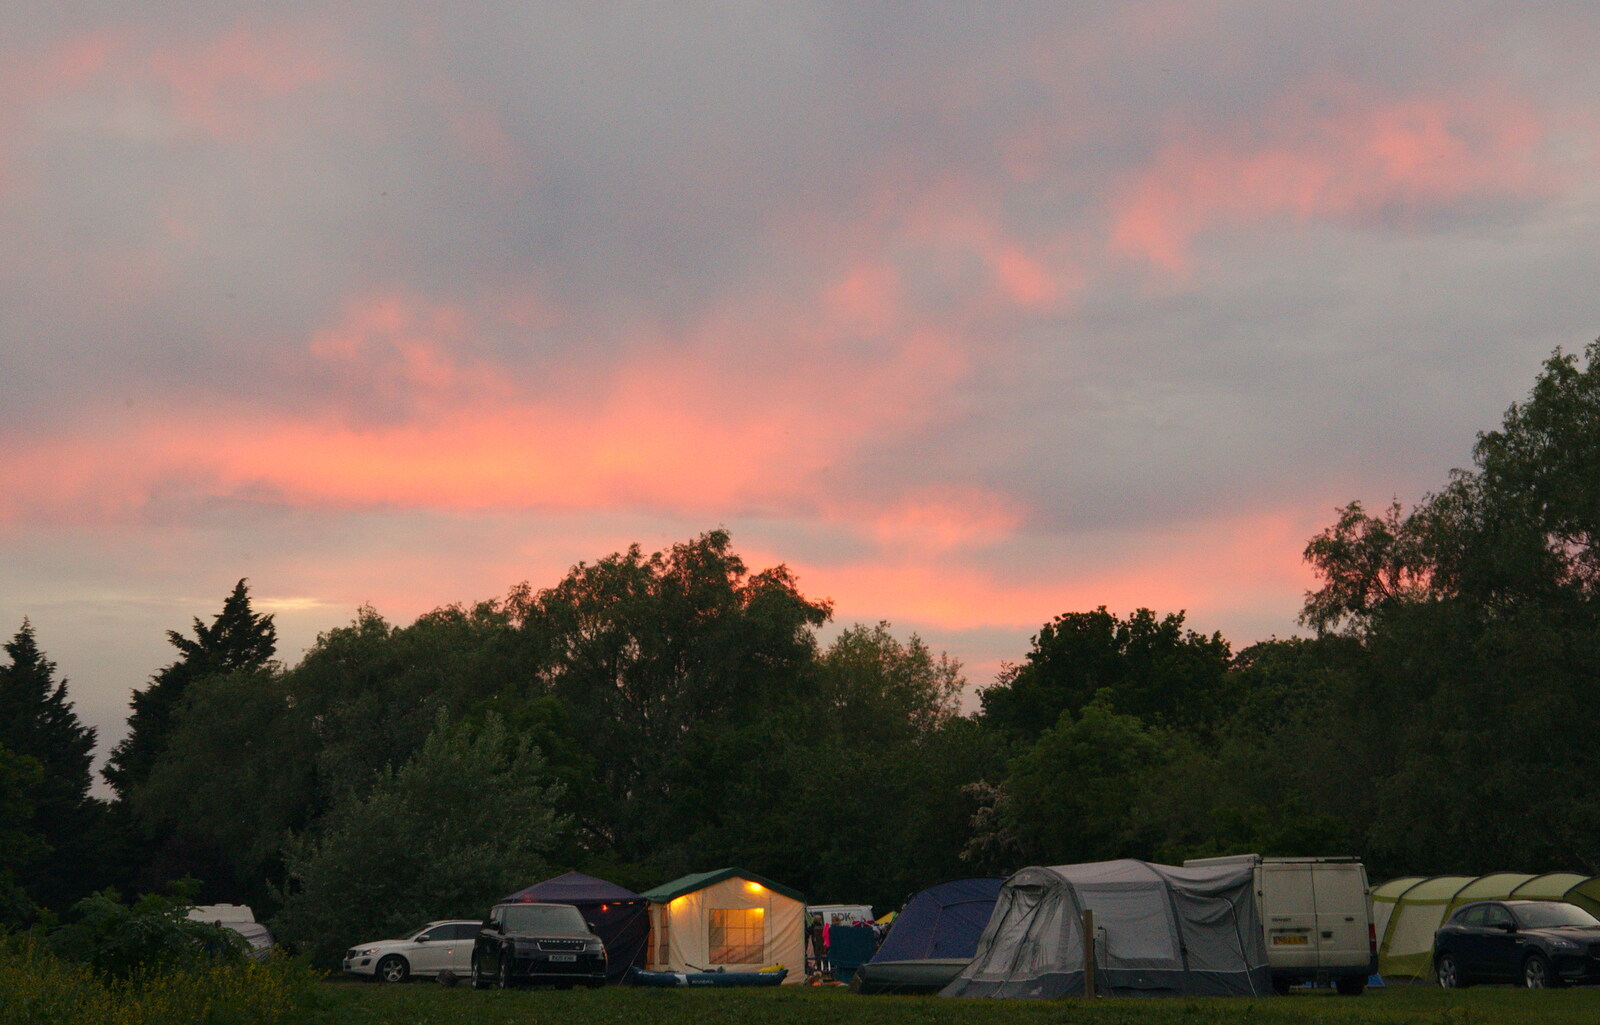 There's a burst of red cloud as the sun sets from Camping at Three Rivers, Geldeston, Norfolk - 1st June 2019